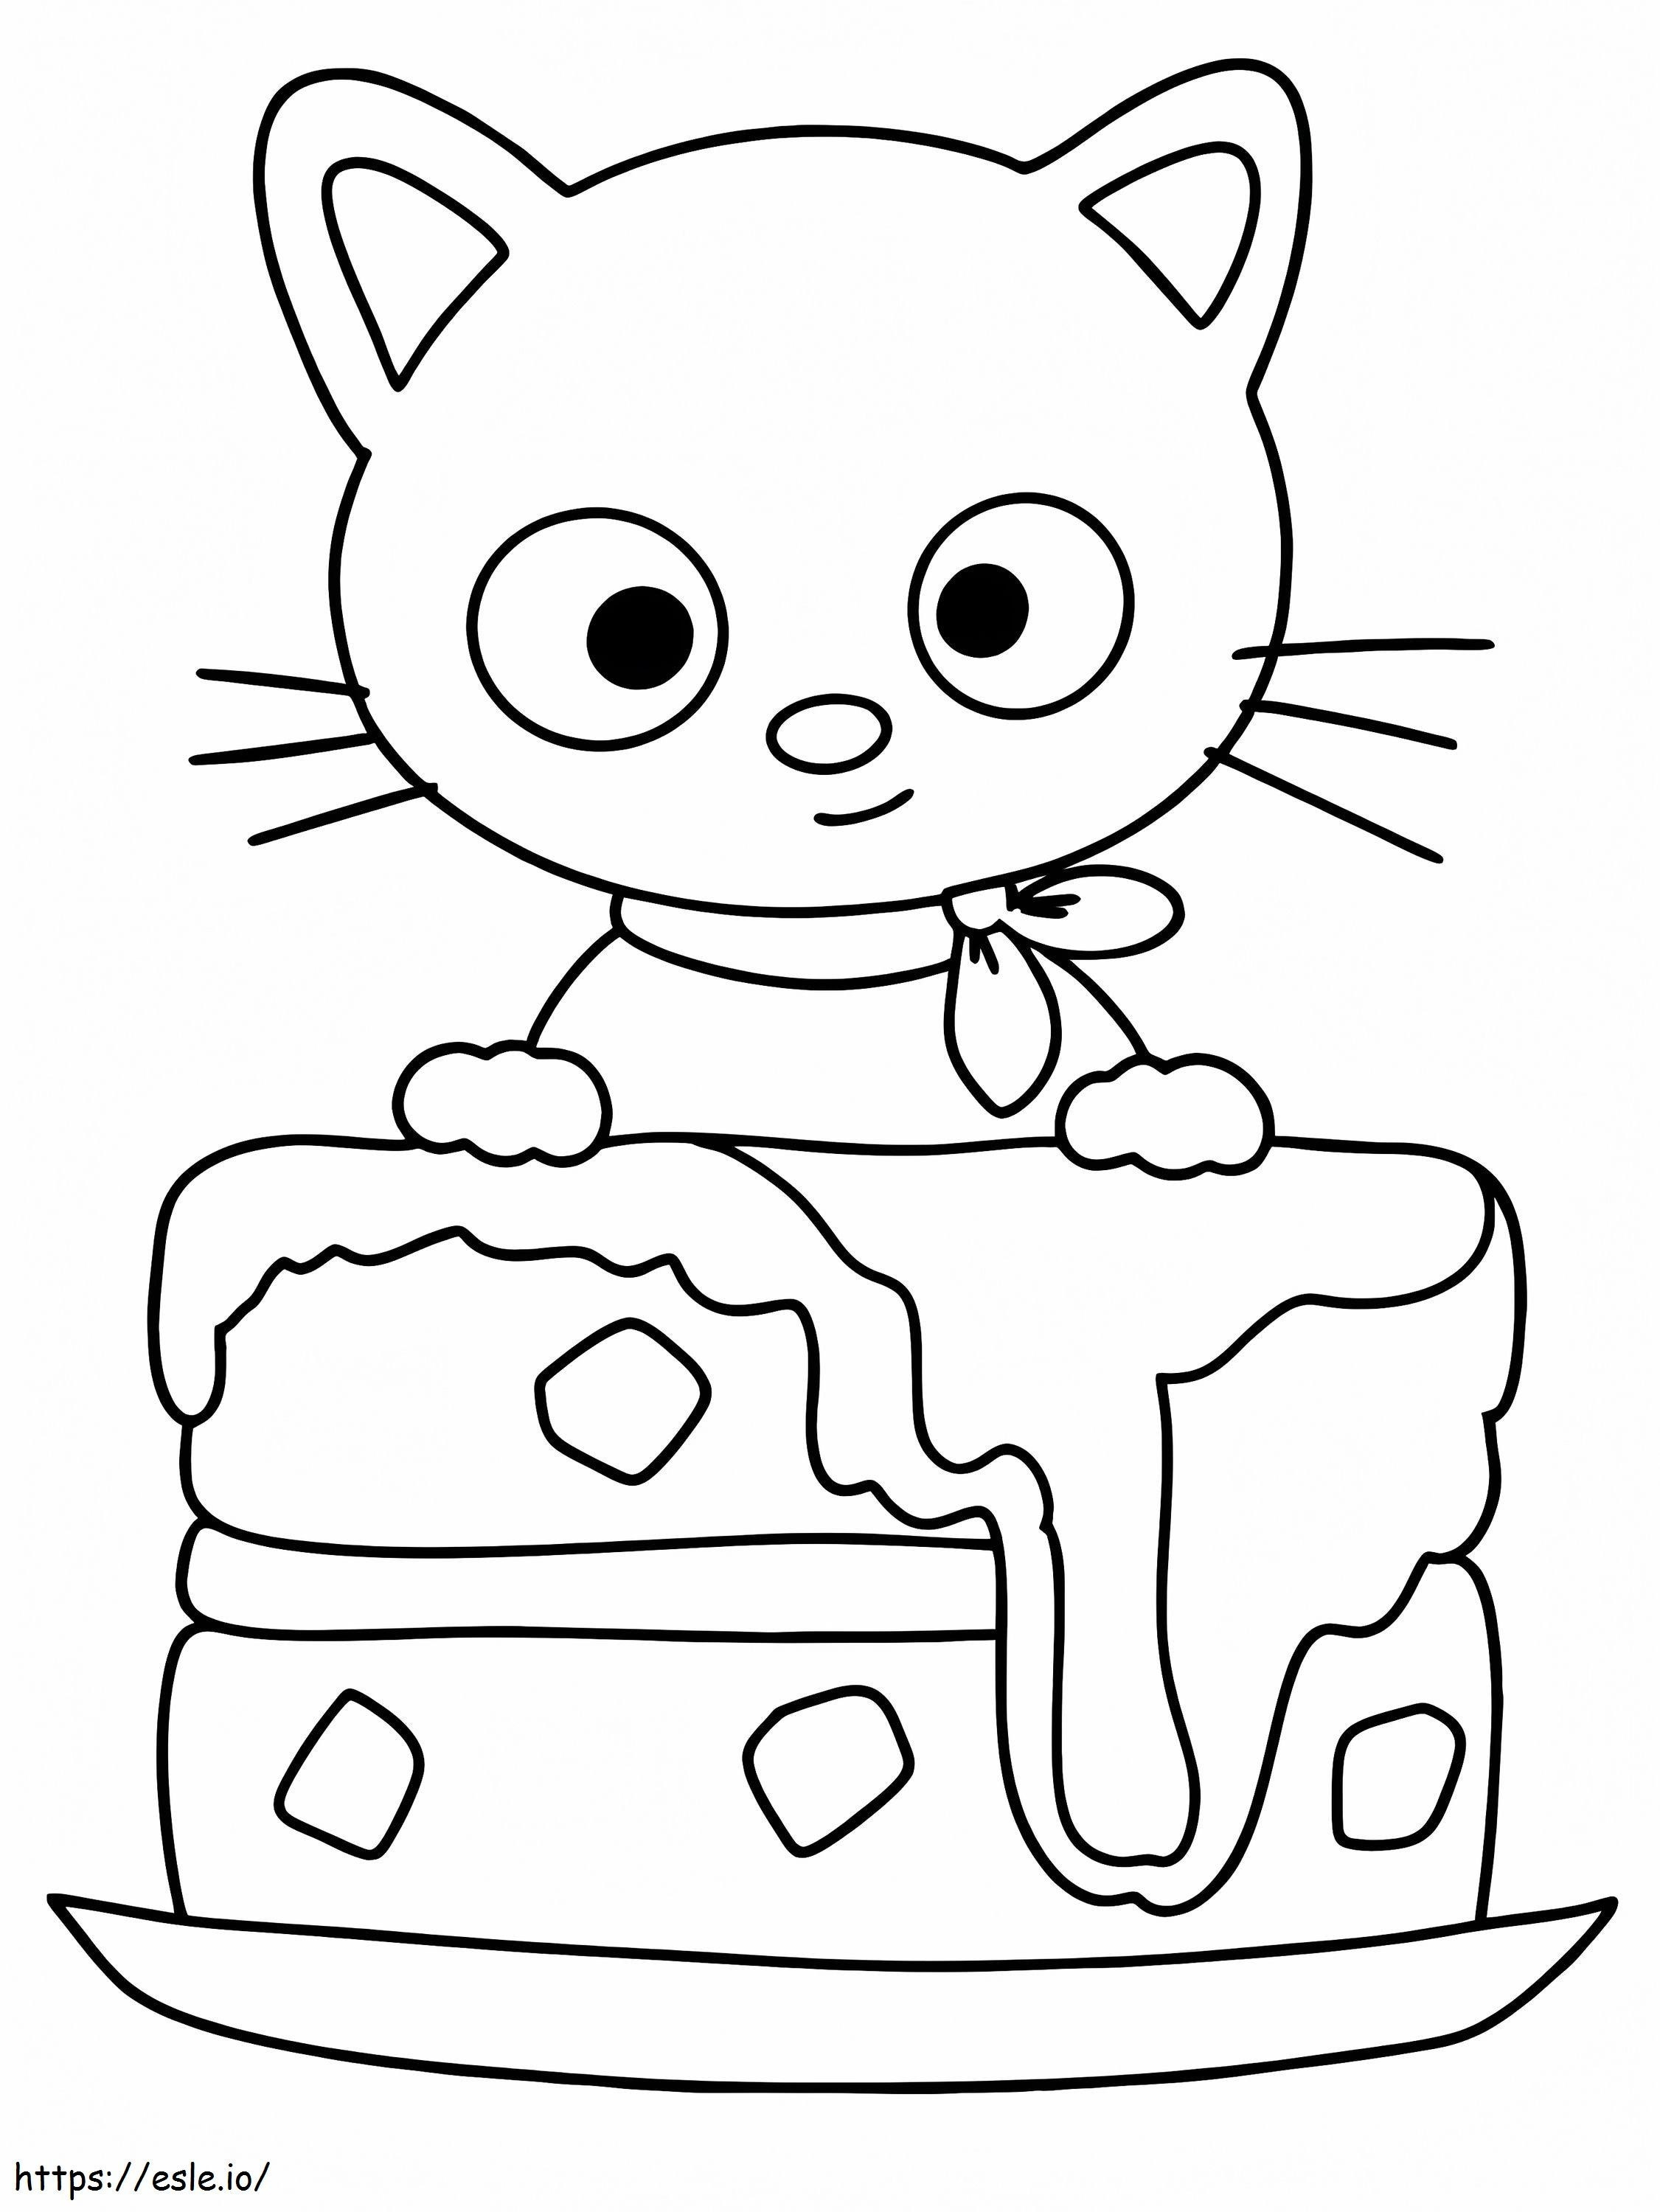 Chococat With Cake coloring page